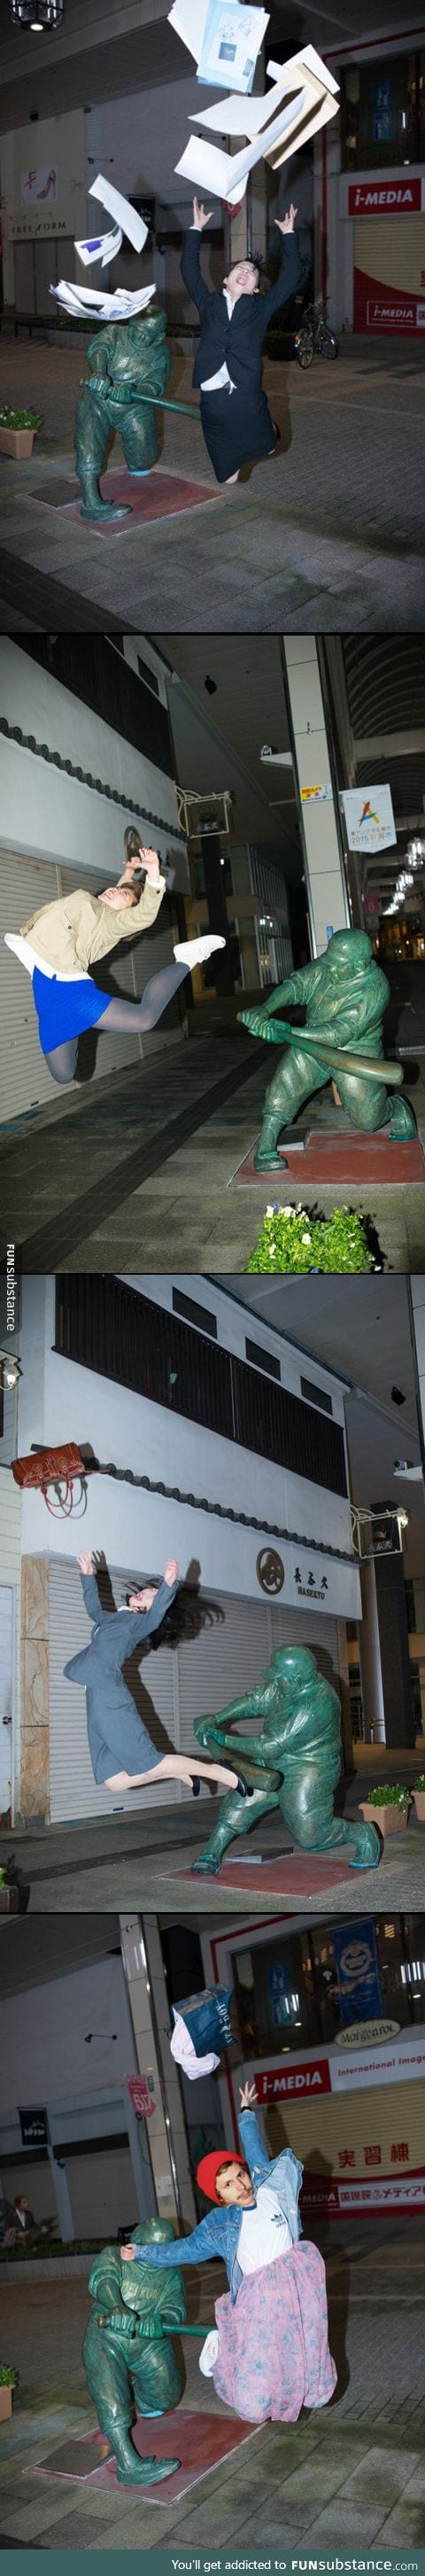 Sooo...They put up a new sculpture in Japan and this happens every day